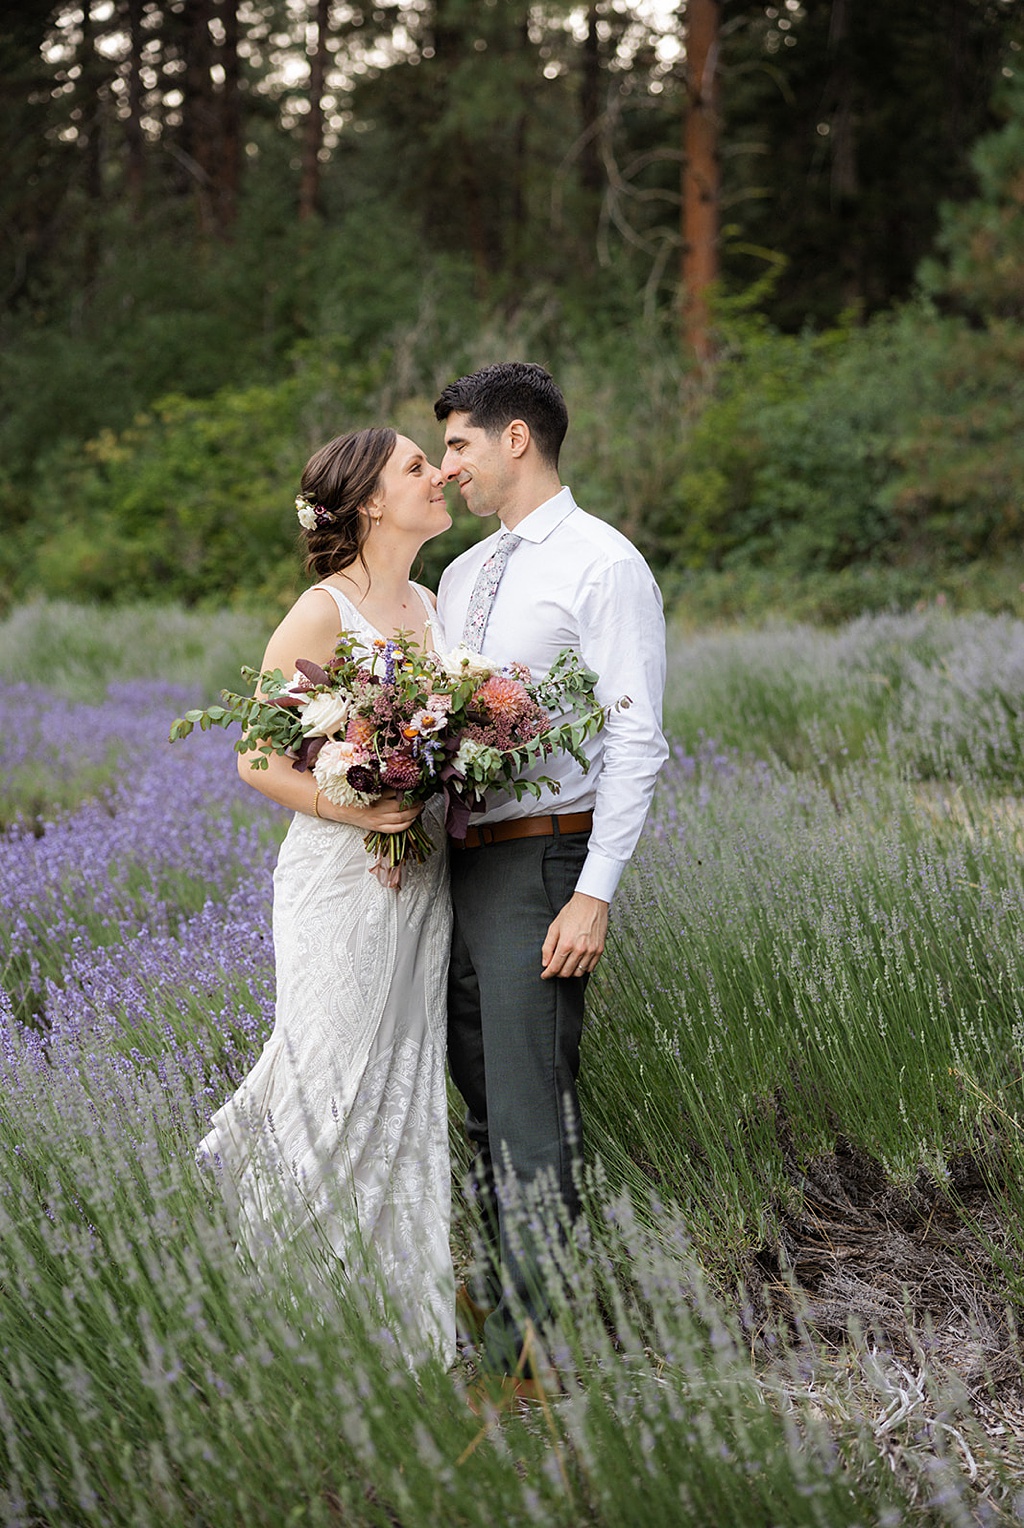 The couple stands in a lavender field at this Tierra Retreat Center wedding